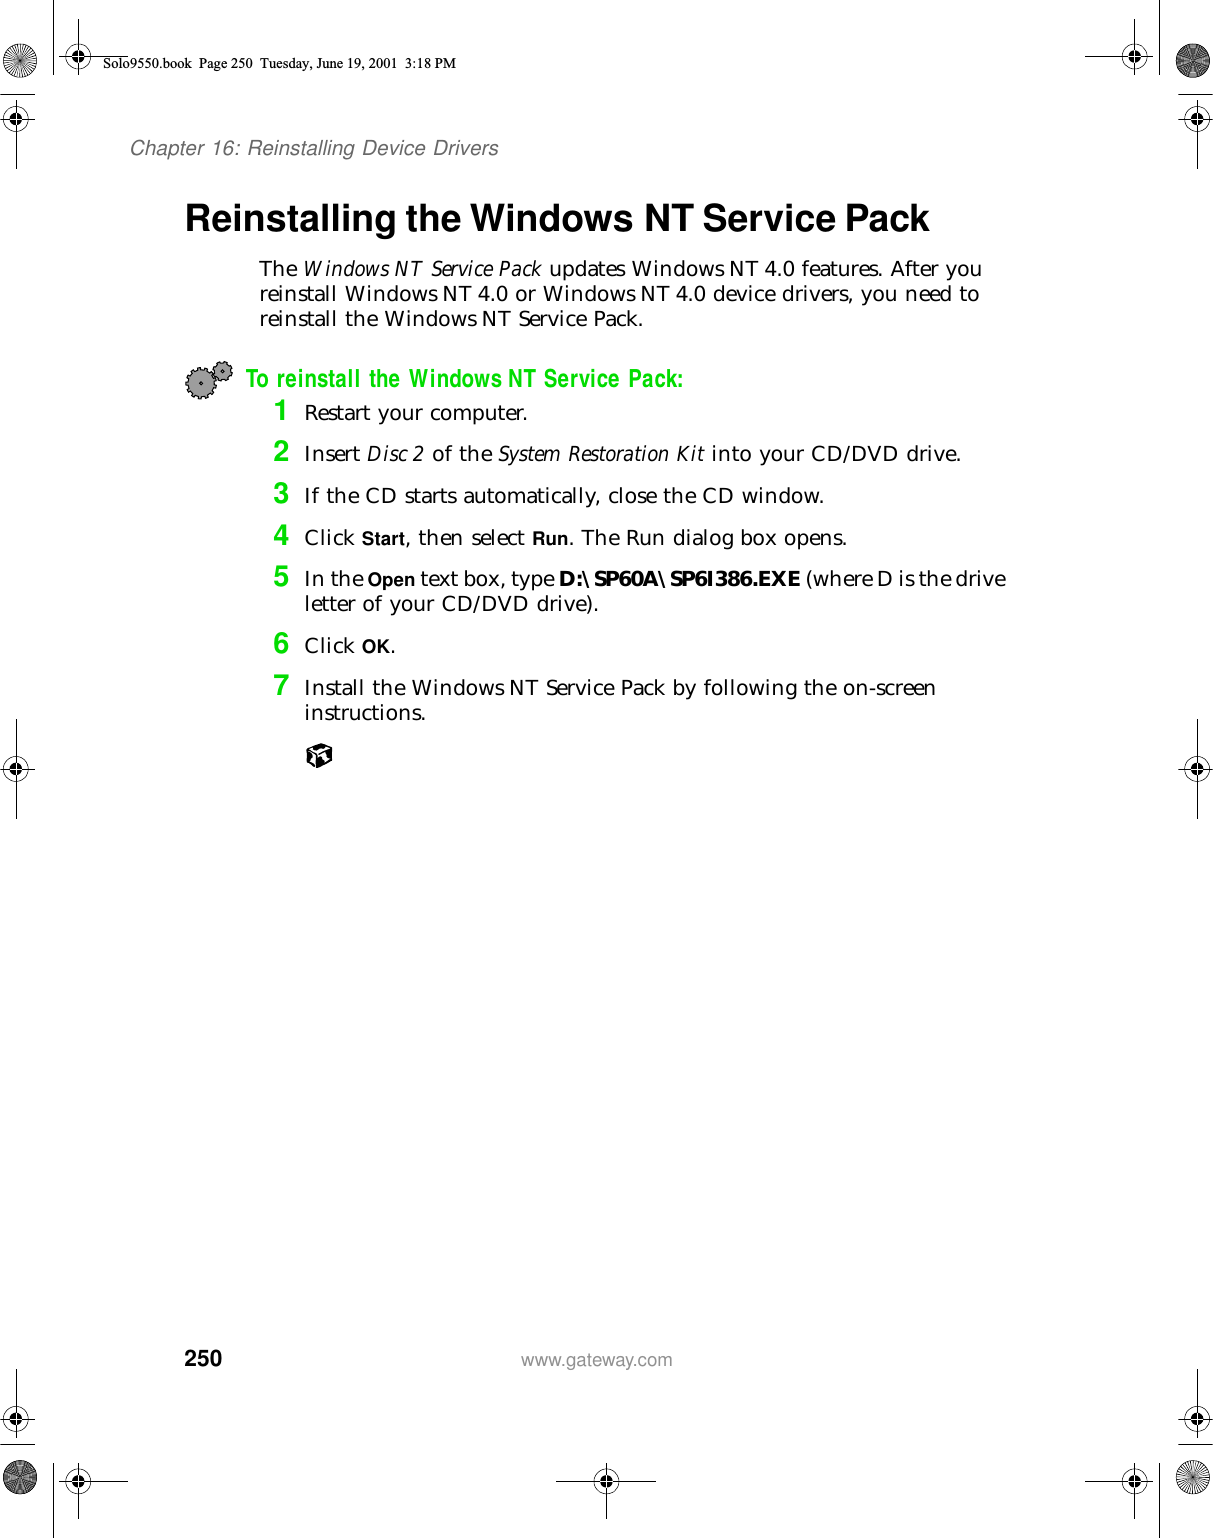 250Chapter 16: Reinstalling Device Driverswww.gateway.comReinstalling the Windows NT Service PackThe Windows NT Service Pack updates Windows NT 4.0 features. After you reinstall Windows NT 4.0 or Windows NT 4.0 device drivers, you need to reinstall the Windows NT Service Pack.To reinstall the Windows NT Service Pack:1Restart your computer.2Insert Disc 2 of the System Restoration Kit into your CD/DVD drive.3If the CD starts automatically, close the CD window.4Click Start, then select Run. The Run dialog box opens.5In the Open text box, type D:\SP60A\SP6I386.EXE (where D is the drive letter of your CD/DVD drive).6Click OK.7Install the Windows NT Service Pack by following the on-screen instructions.Solo9550.book Page 250 Tuesday, June 19, 2001 3:18 PM